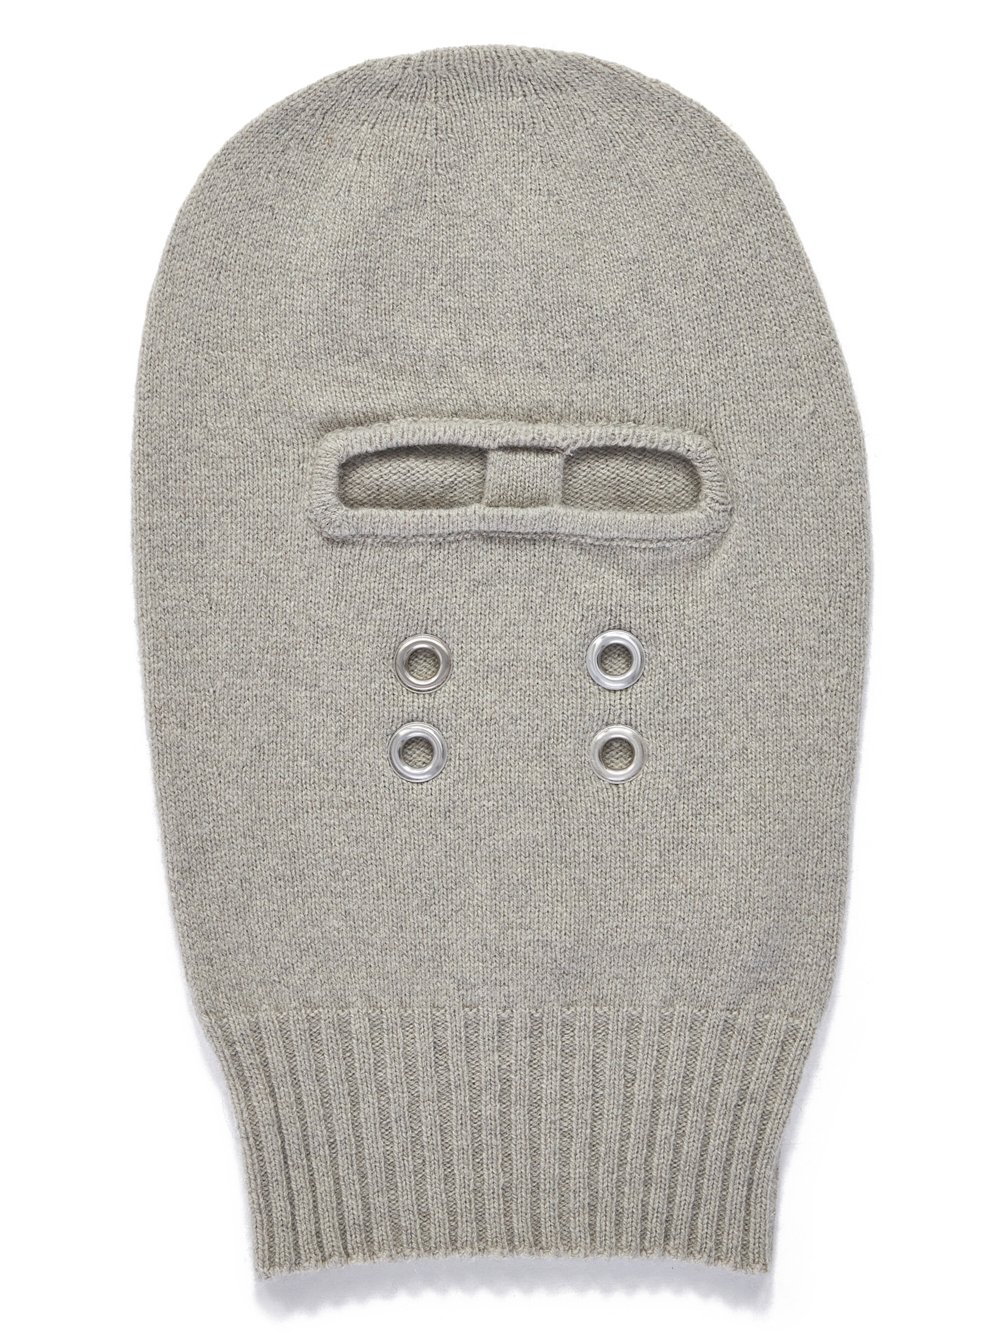 RICK OWENS FW23 LUXOR GIMP BALACLAVA IN PEARL RECYCLED CASHMERE KNIT